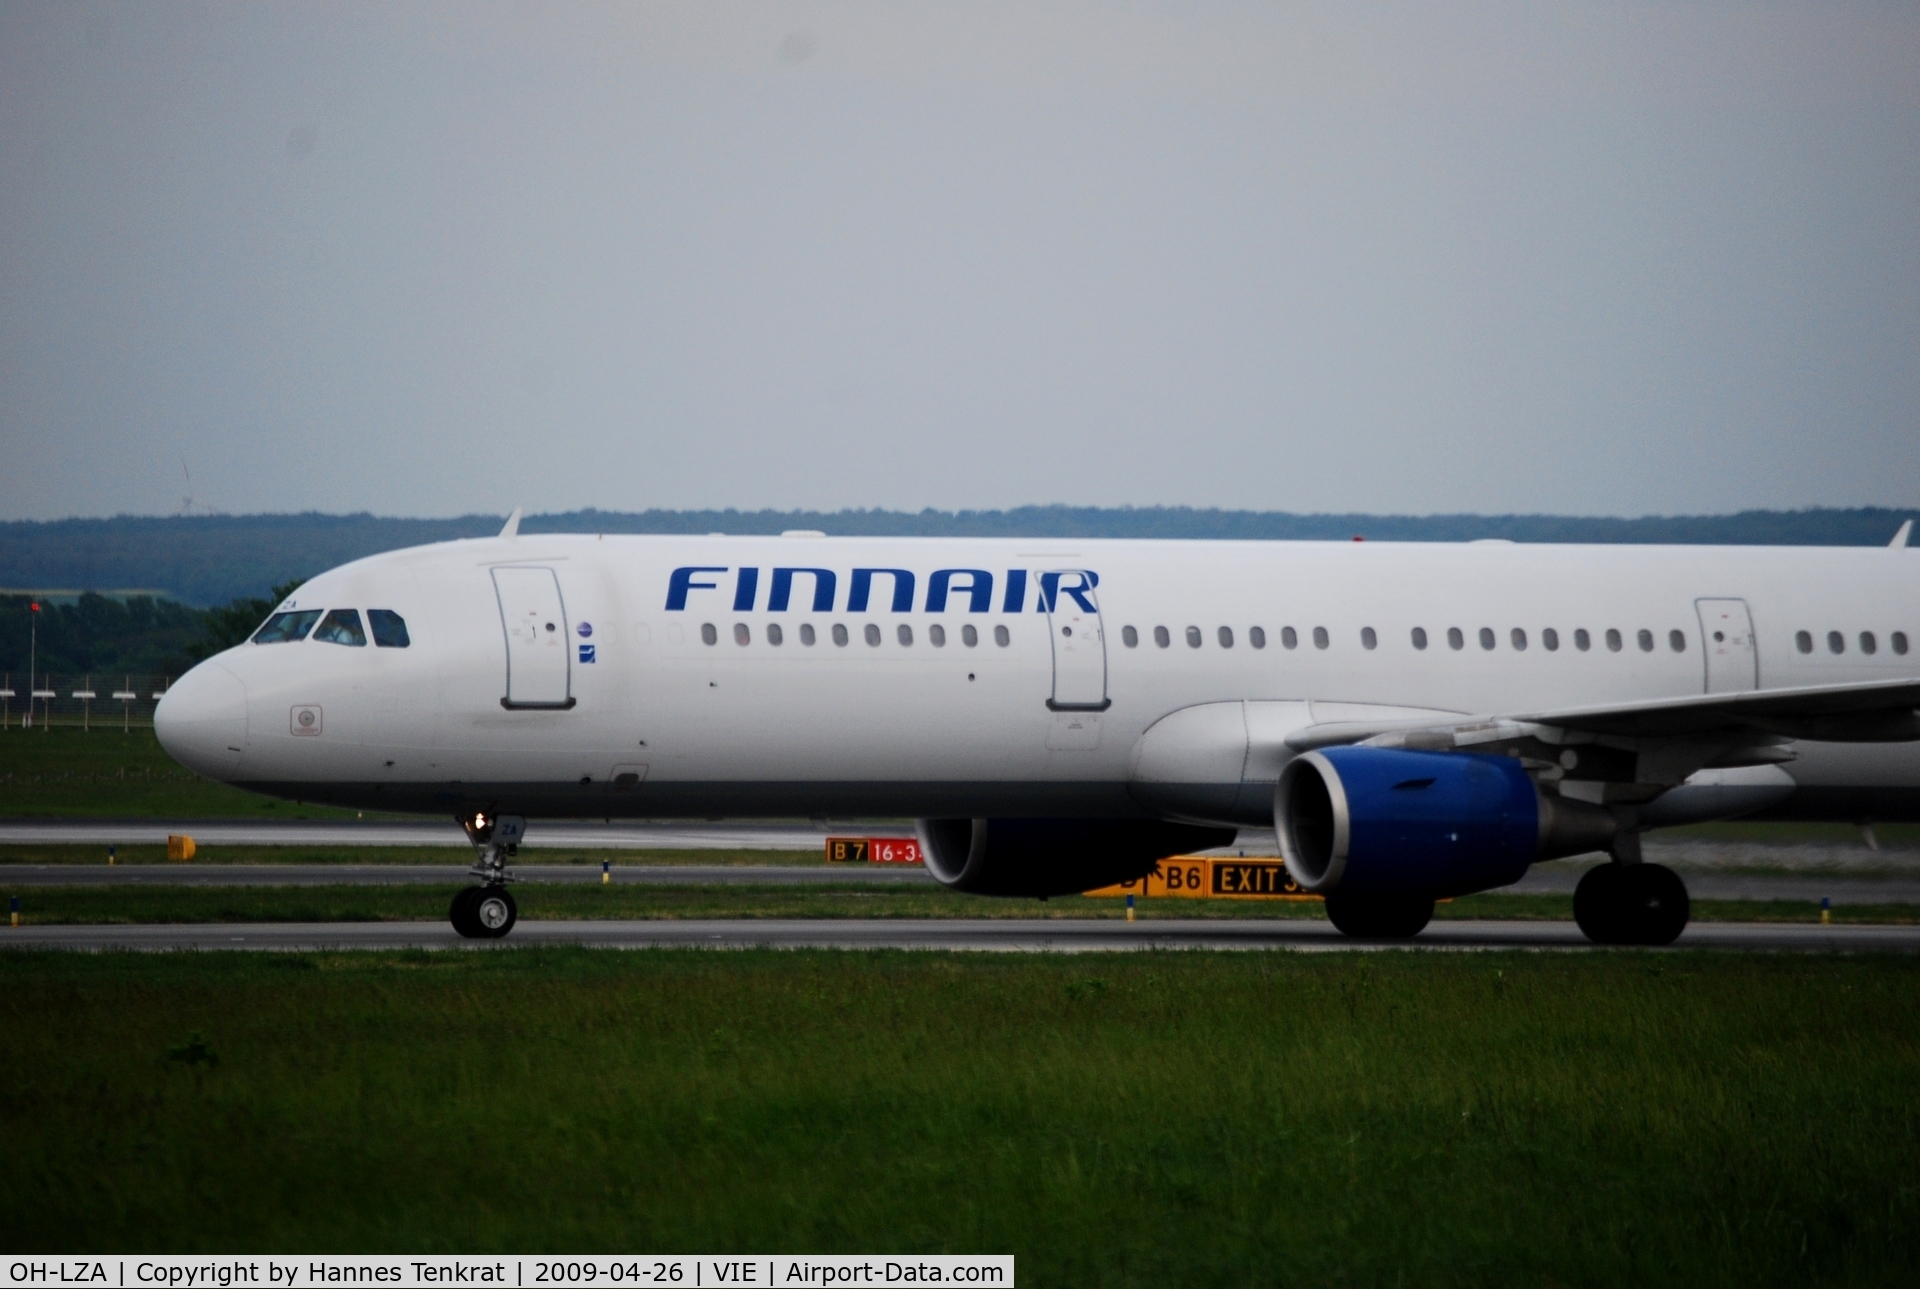 OH-LZA, 1999 Airbus A321-211 C/N 0941, Finnair Airbus A321 taxiing to the Gate after landing on RNW 16